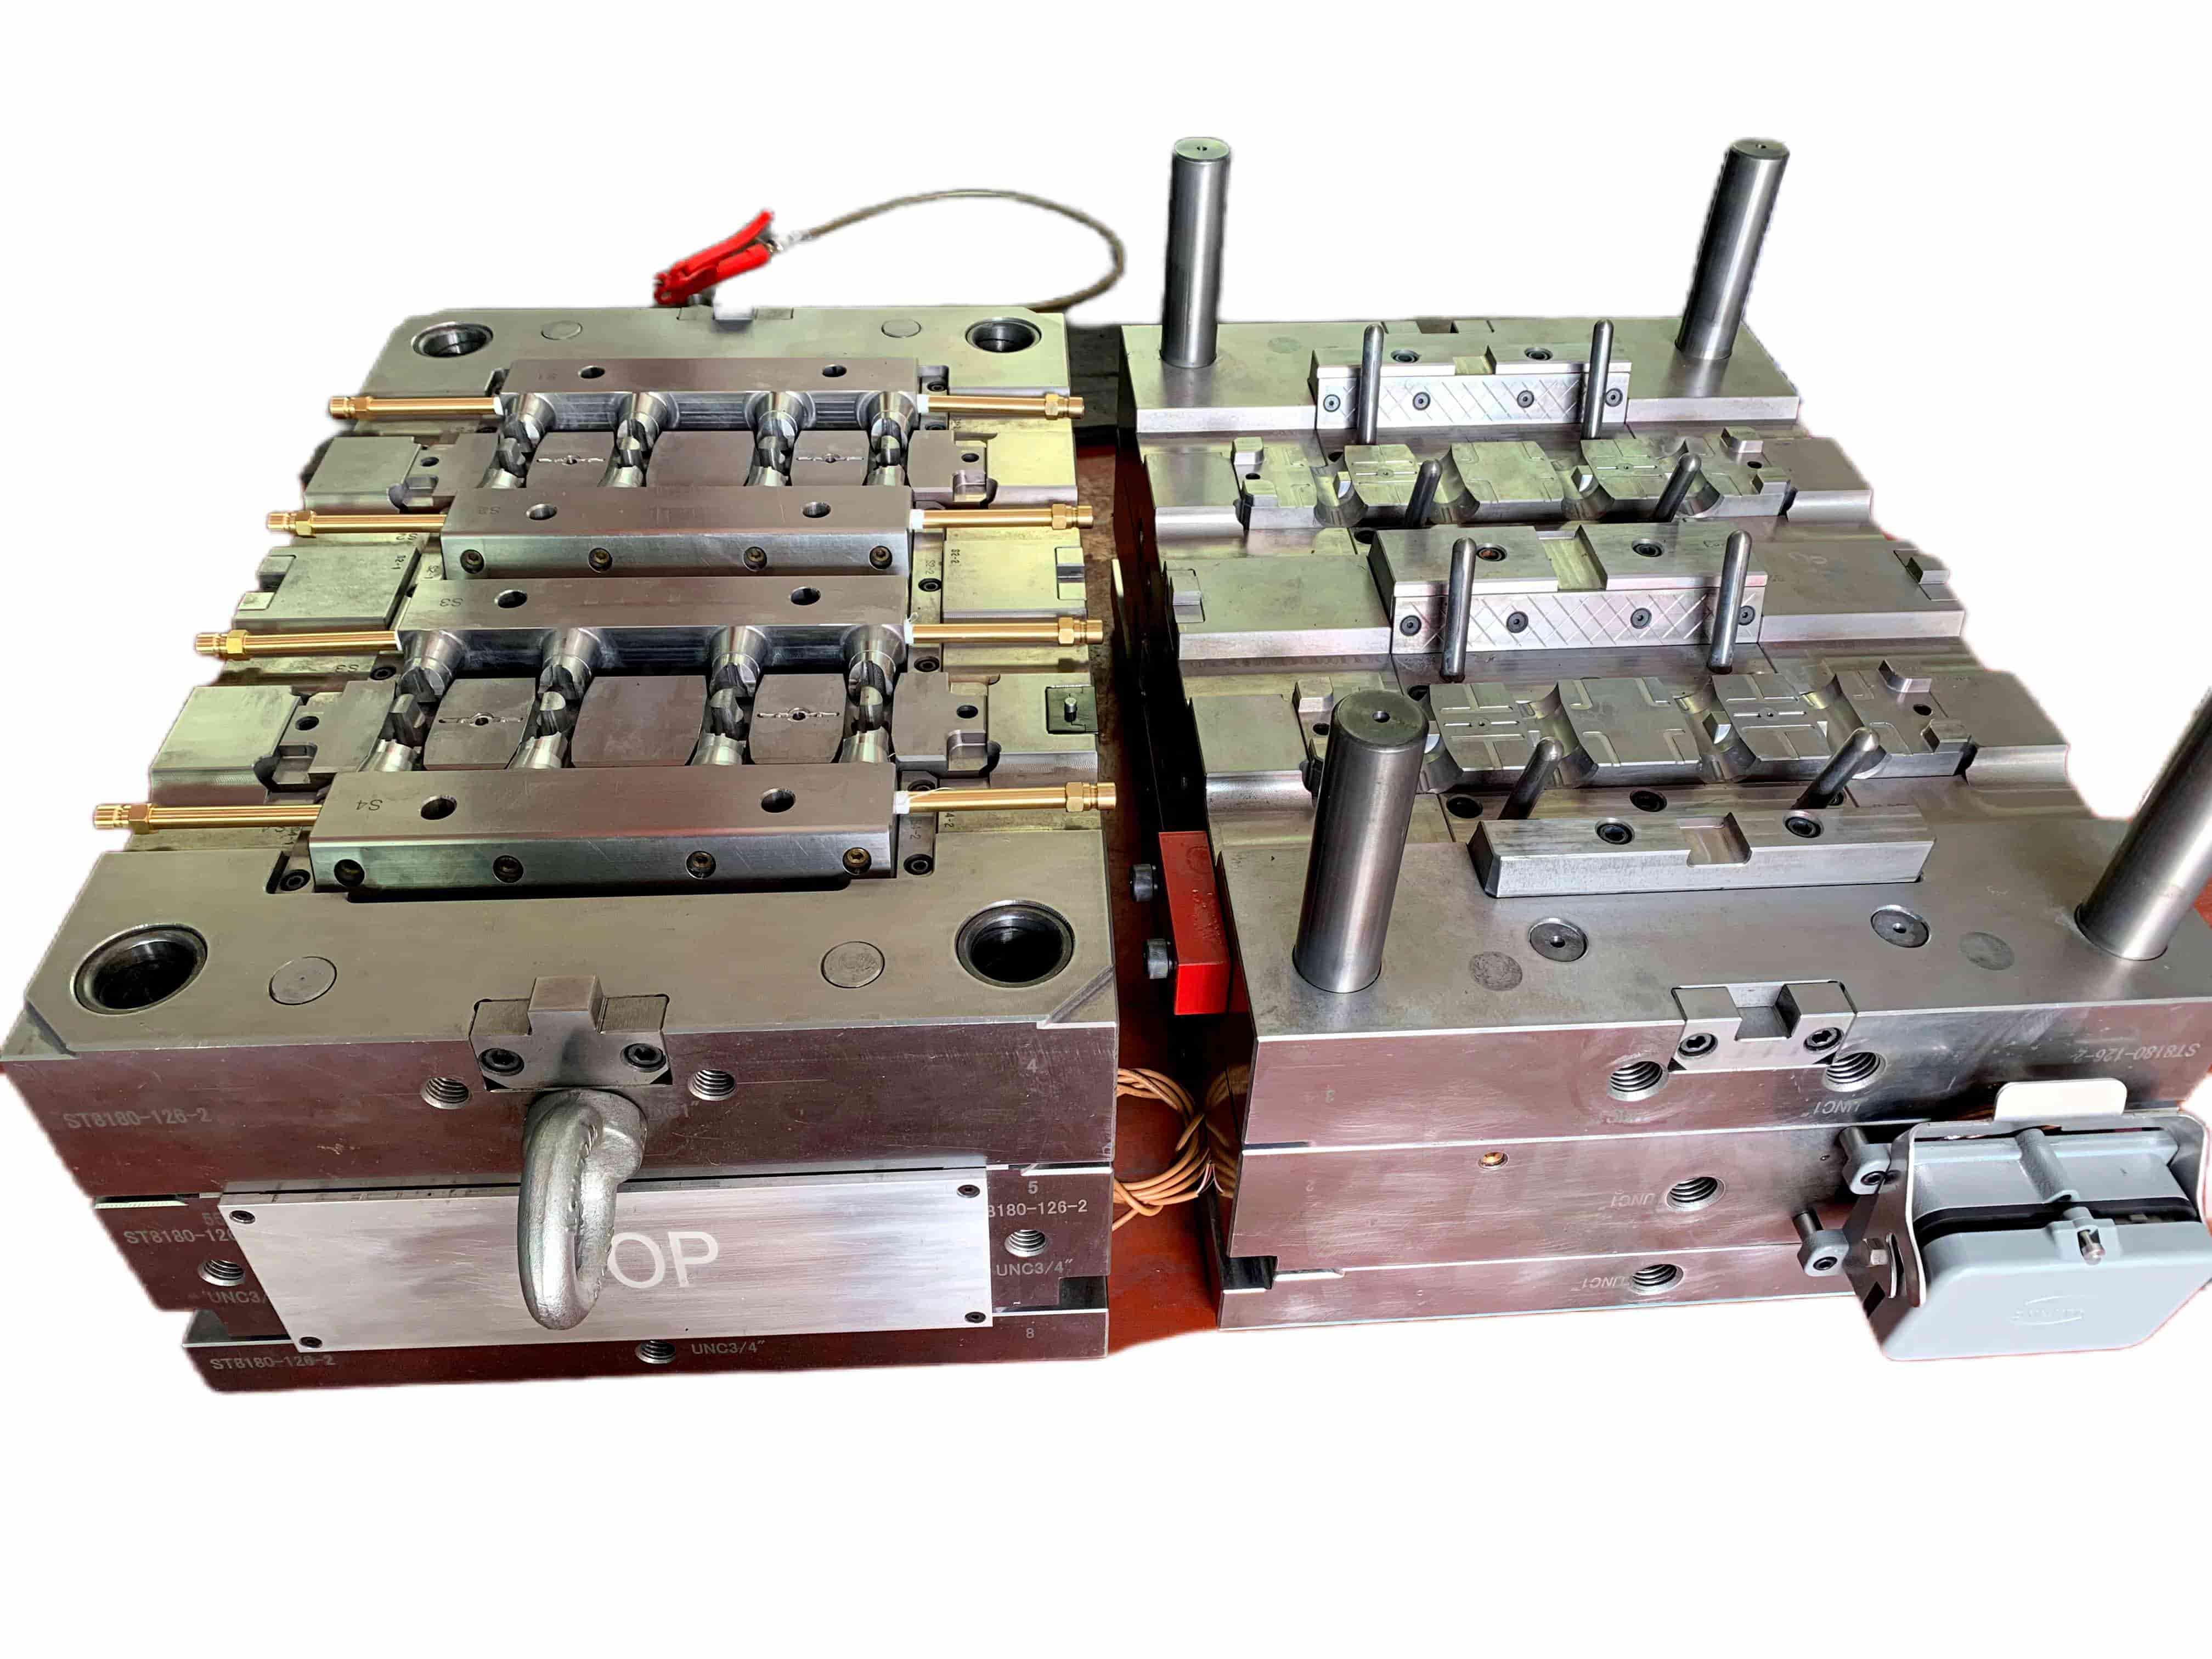 Mold Making - Plastic Injection Molding and Mold Maker Manufacturing